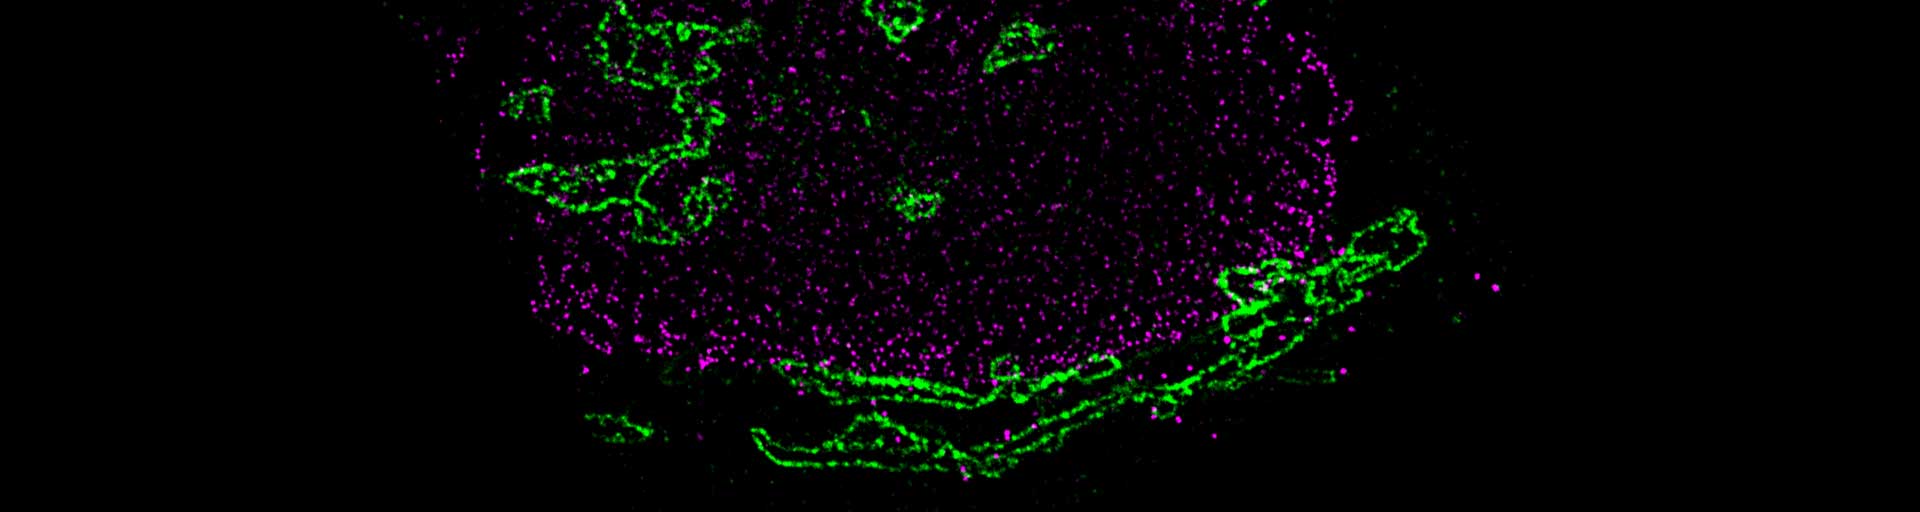 2-color STED image of mammalian cell, stained with nanobody conjugated abberior STAR dyes